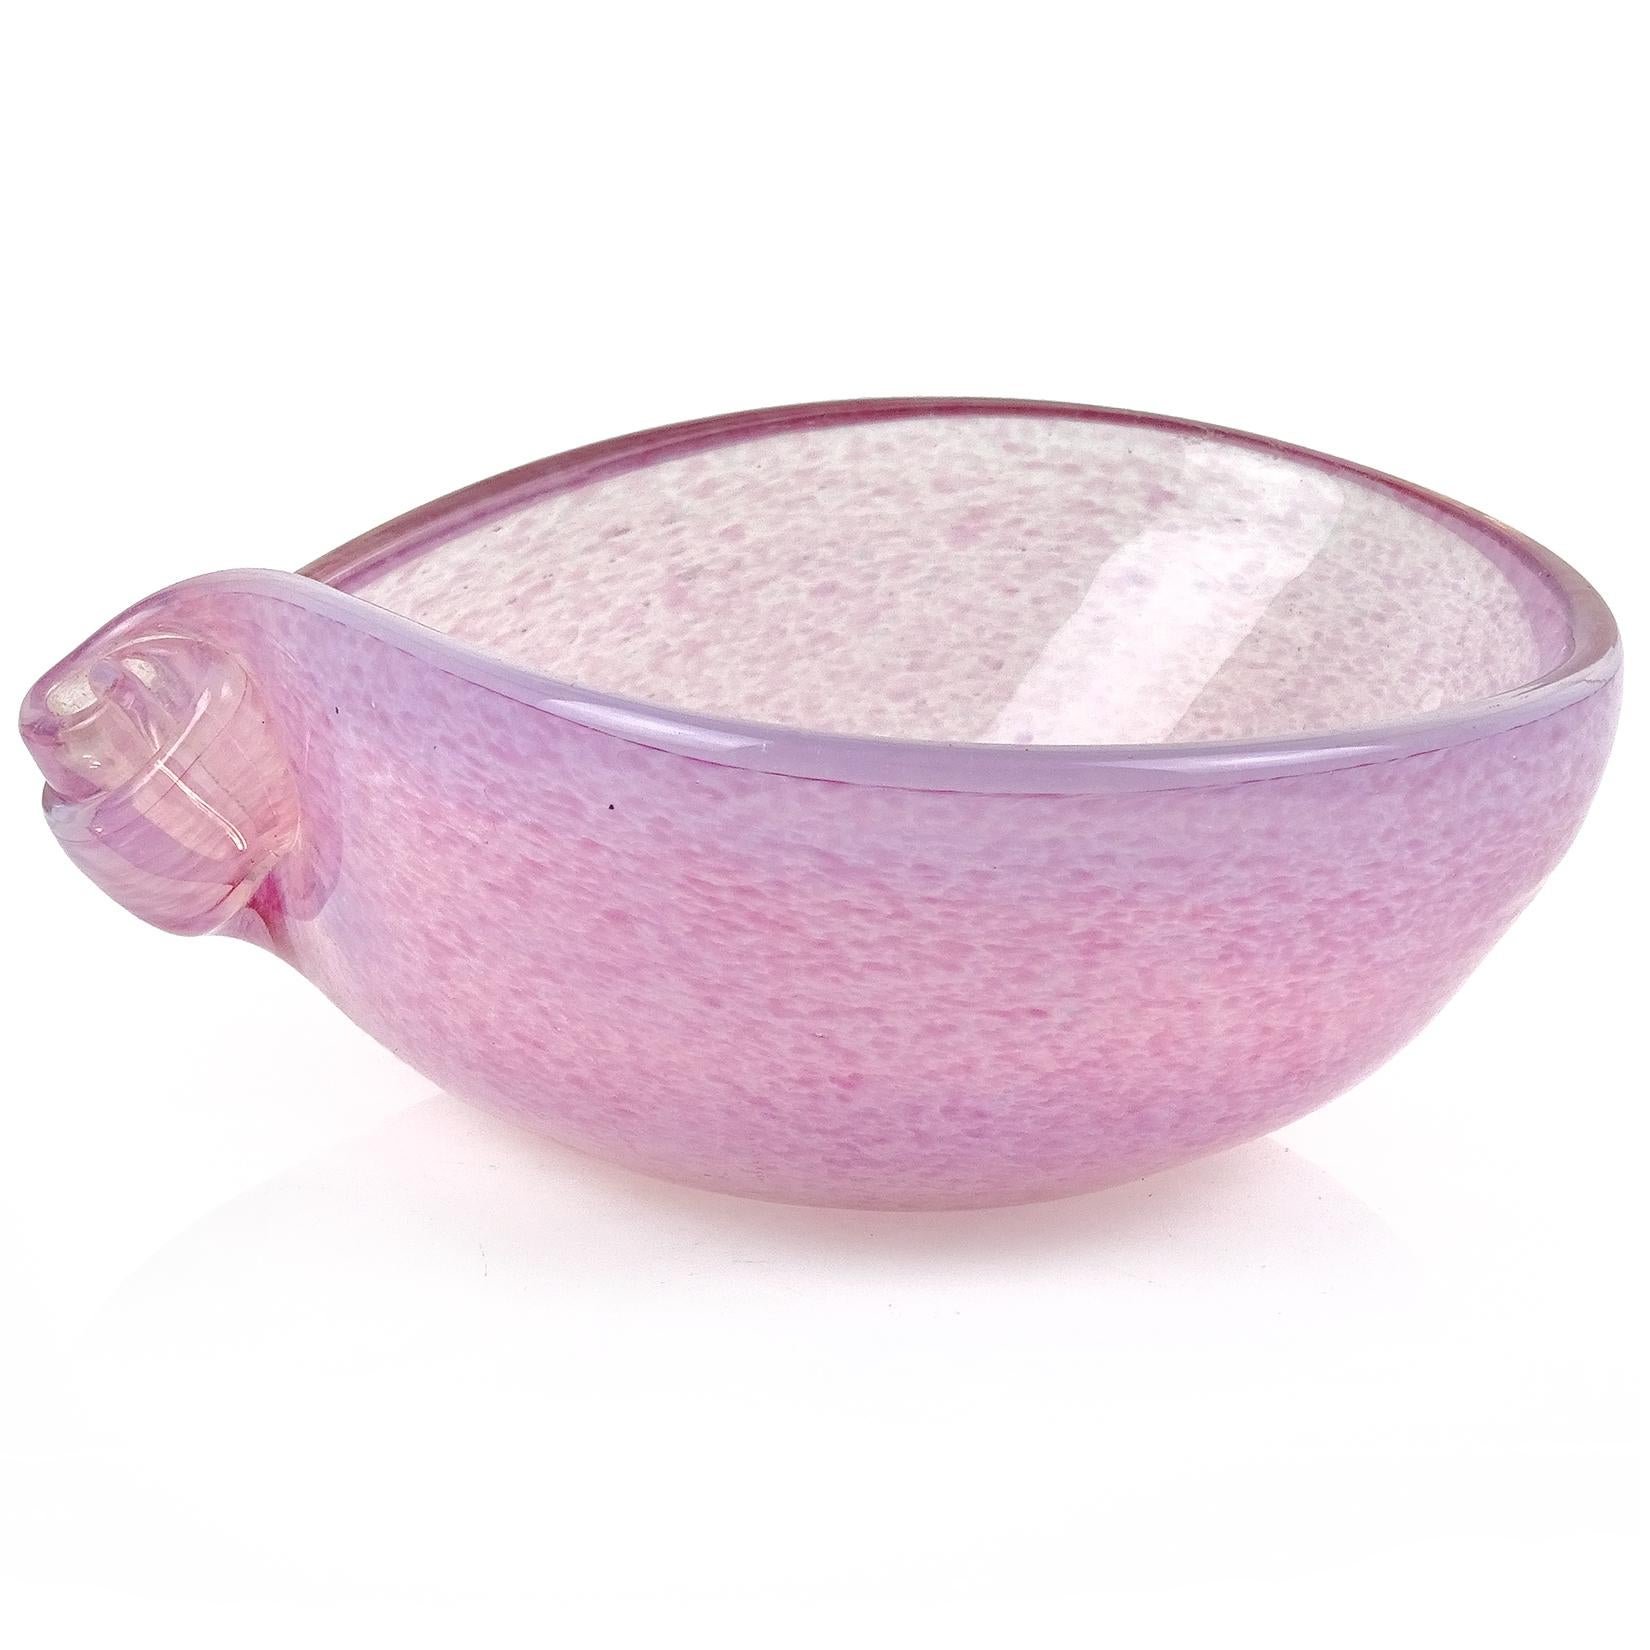 Beautiful Murano hand blown opalescent and pink spots Italian art glass seashell shape design bowl. Attributed to the Fratelli Toso Company. Has a scroll decoration on one end. The piece would make a great ring / jewelry dish. Measures 5 1/2” long x